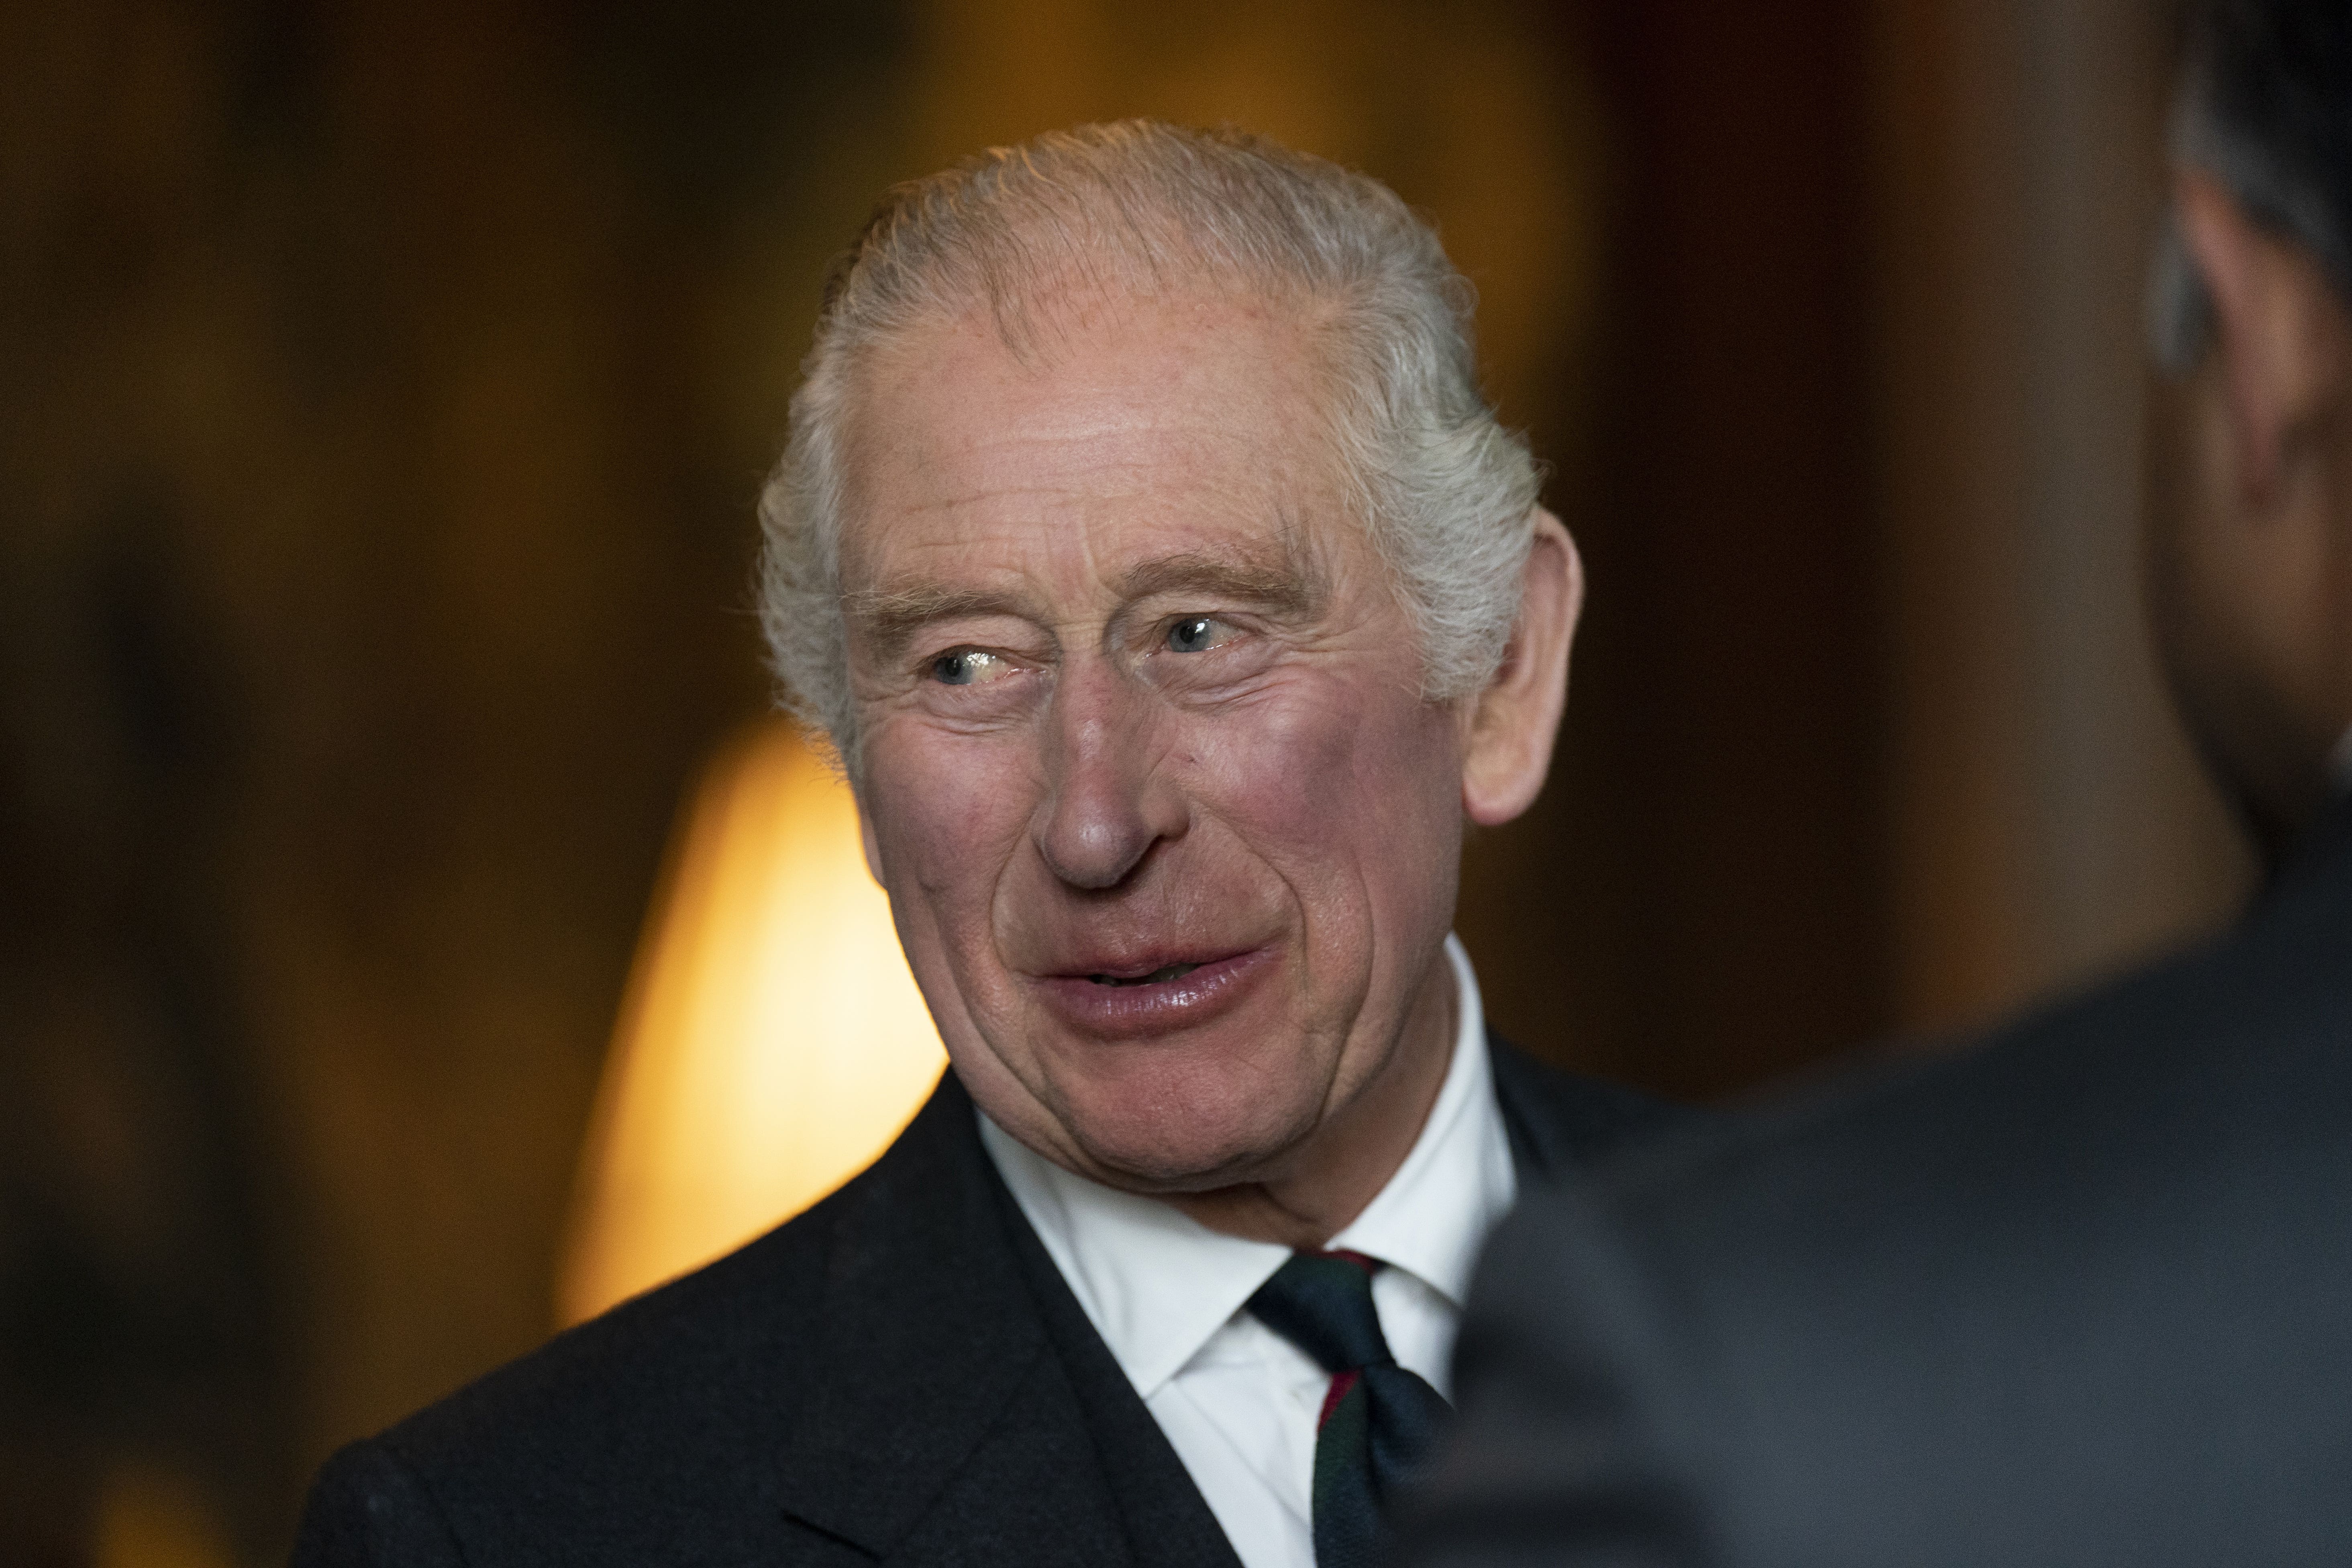 King Charles III is not expected to attend despite his long-held concerns about climate